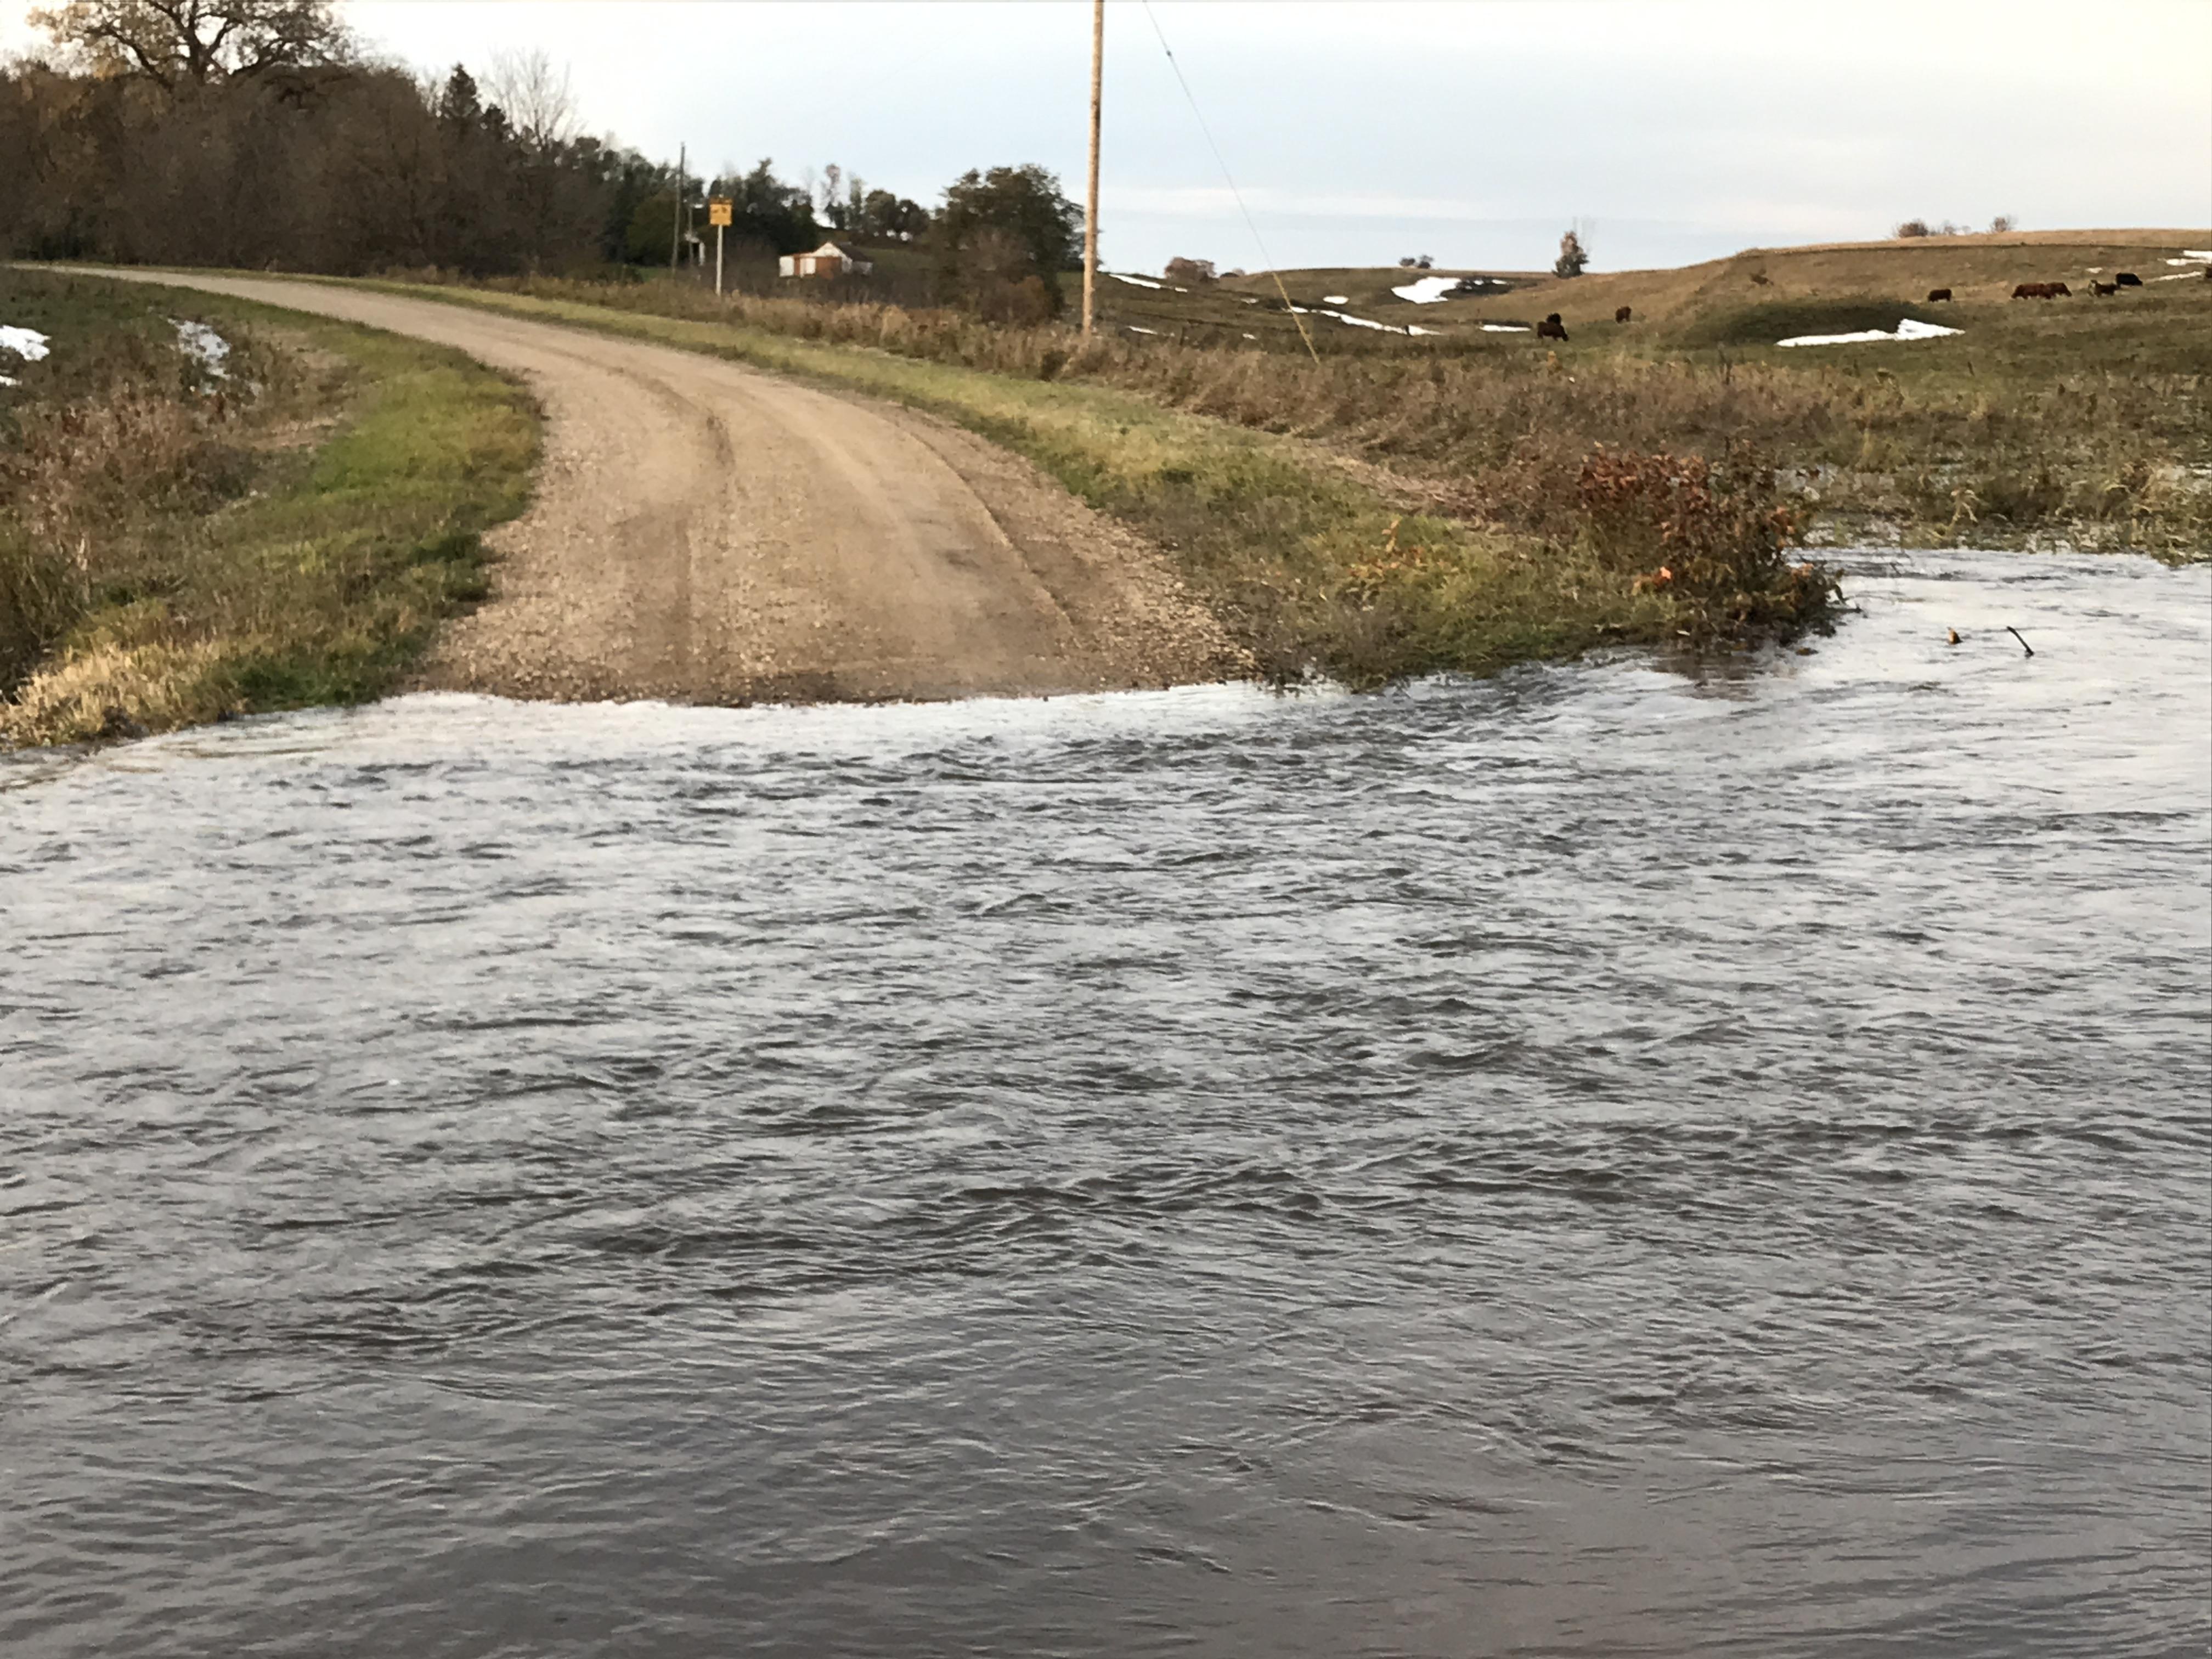 River or overland flooding can cut off access to feed and/or water sources for livestock. (NDSU photo)